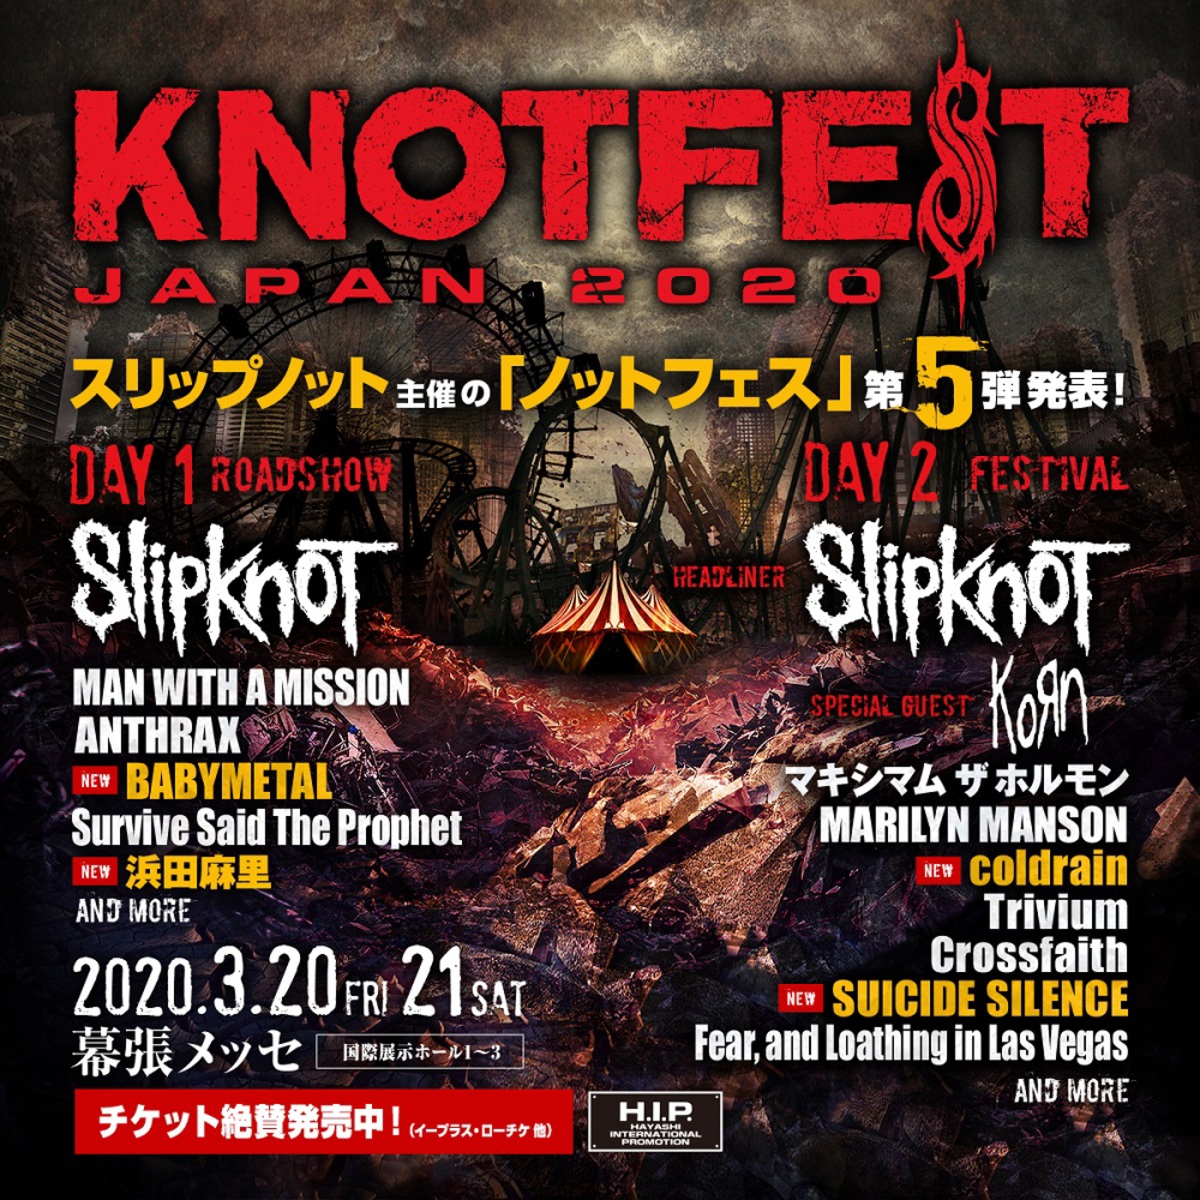 Slipknot主催 Knotfest Japan 第5弾アーティスト発表 Day 1 Roadshow にbabymetal 浜田麻里 Day 2 Festival にcoldrain Suicide Silenceが決定 激ロック ニュース